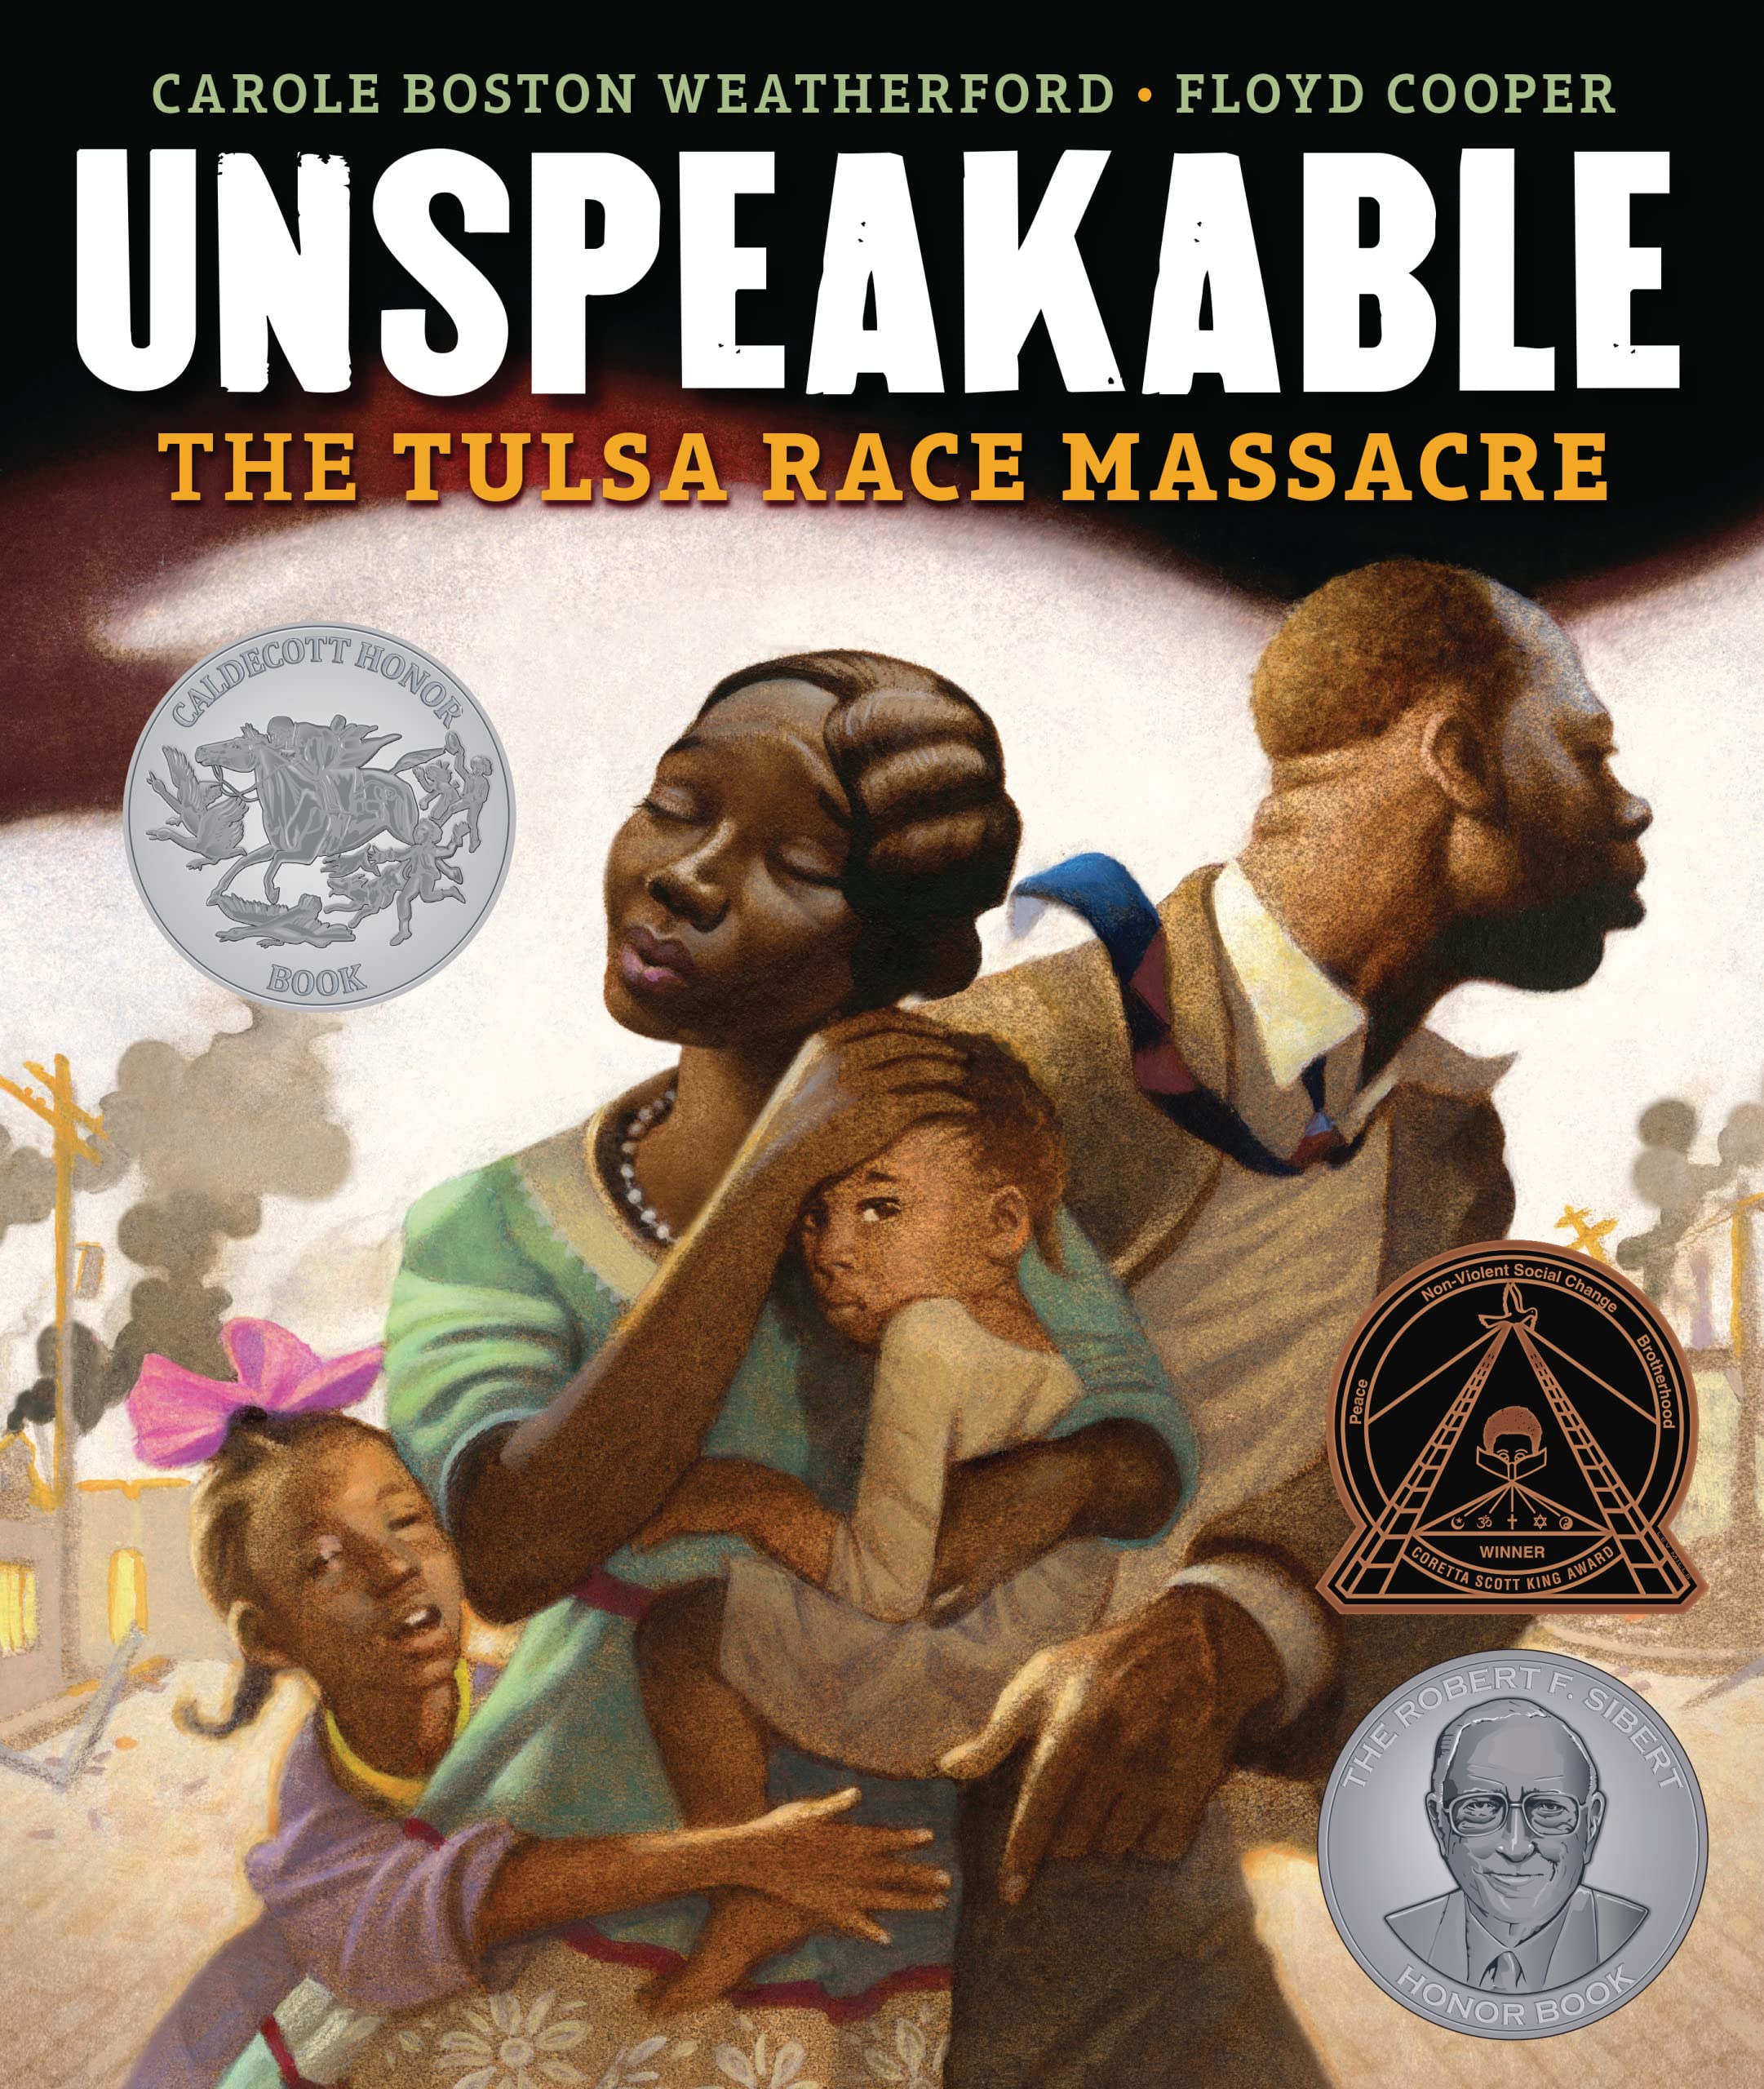 Bookcover: Unspeakable : the Tulsa Race Massacre by Carole Boston Weatherford; illustrated by Floyd Cooper.